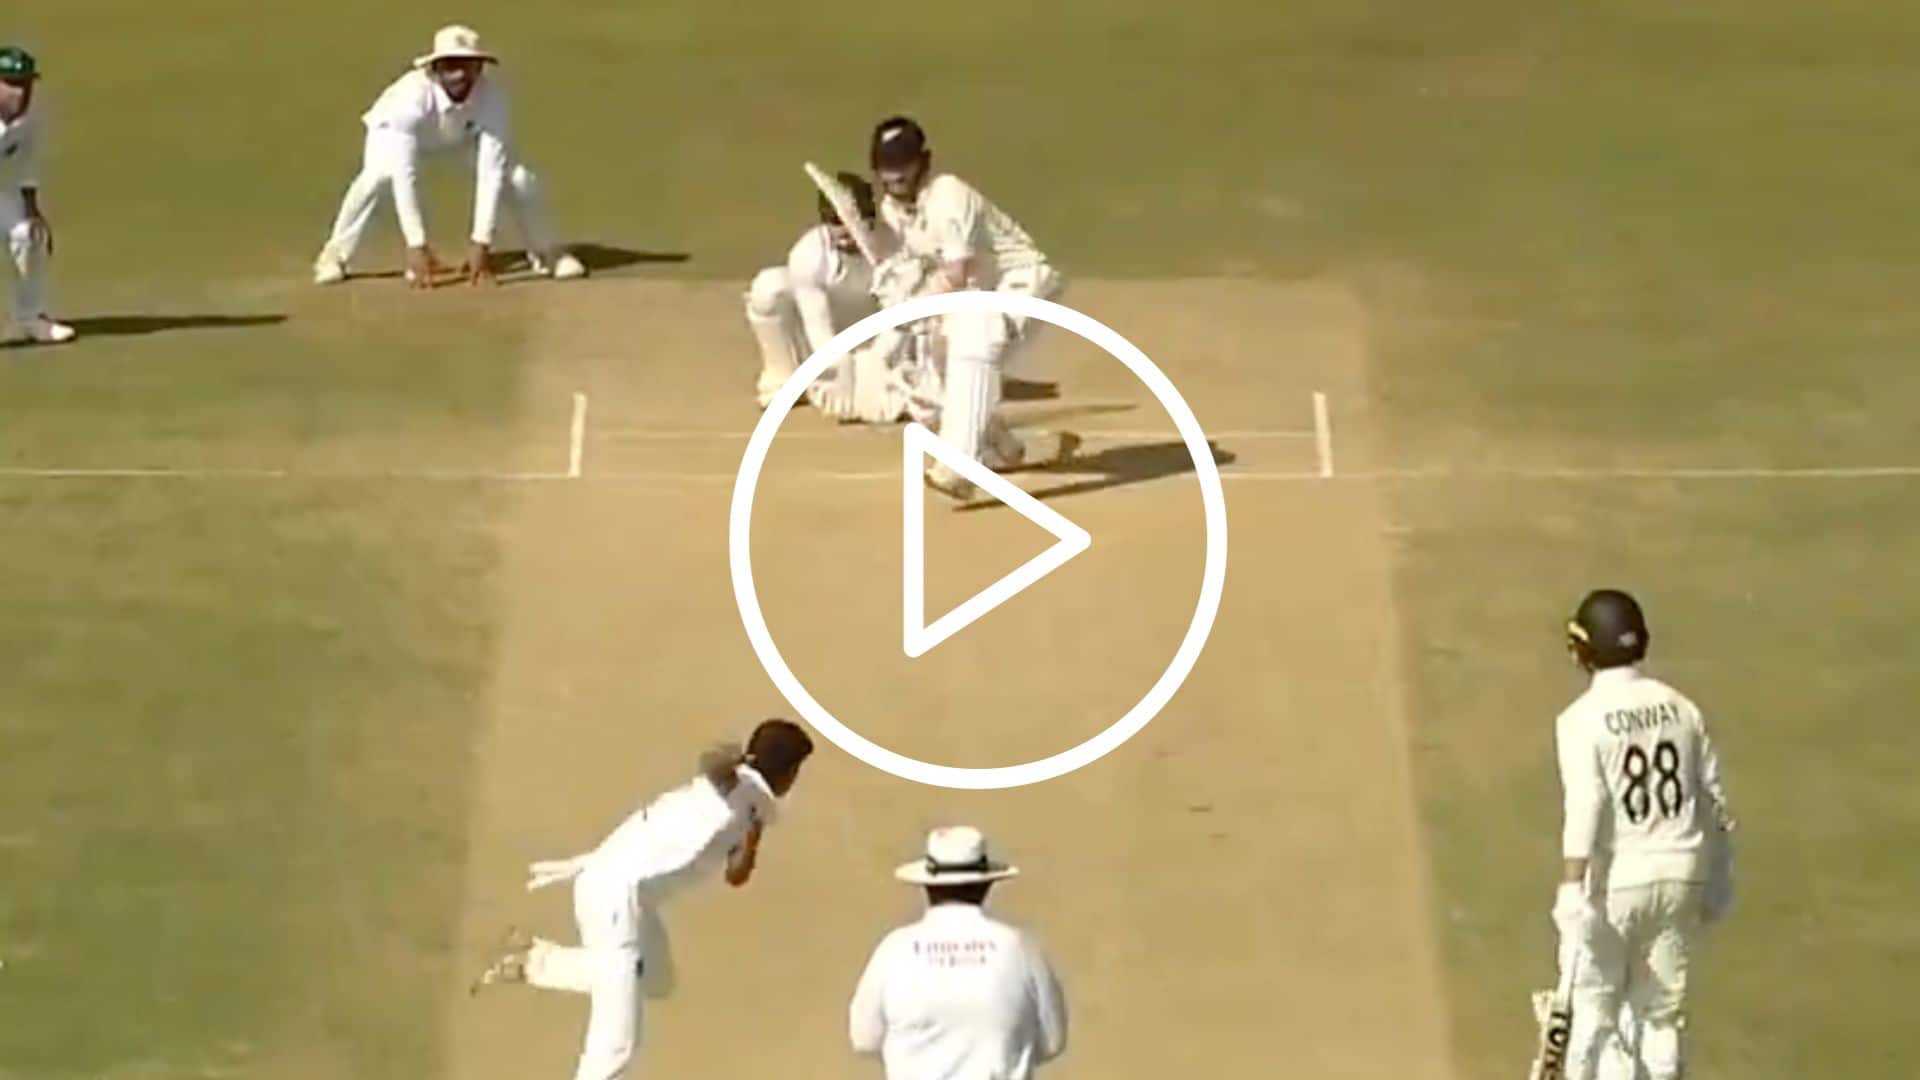 [Watch] Taijul Islam ‘Traps’ Kane Williamson Marvellously With A Beauty